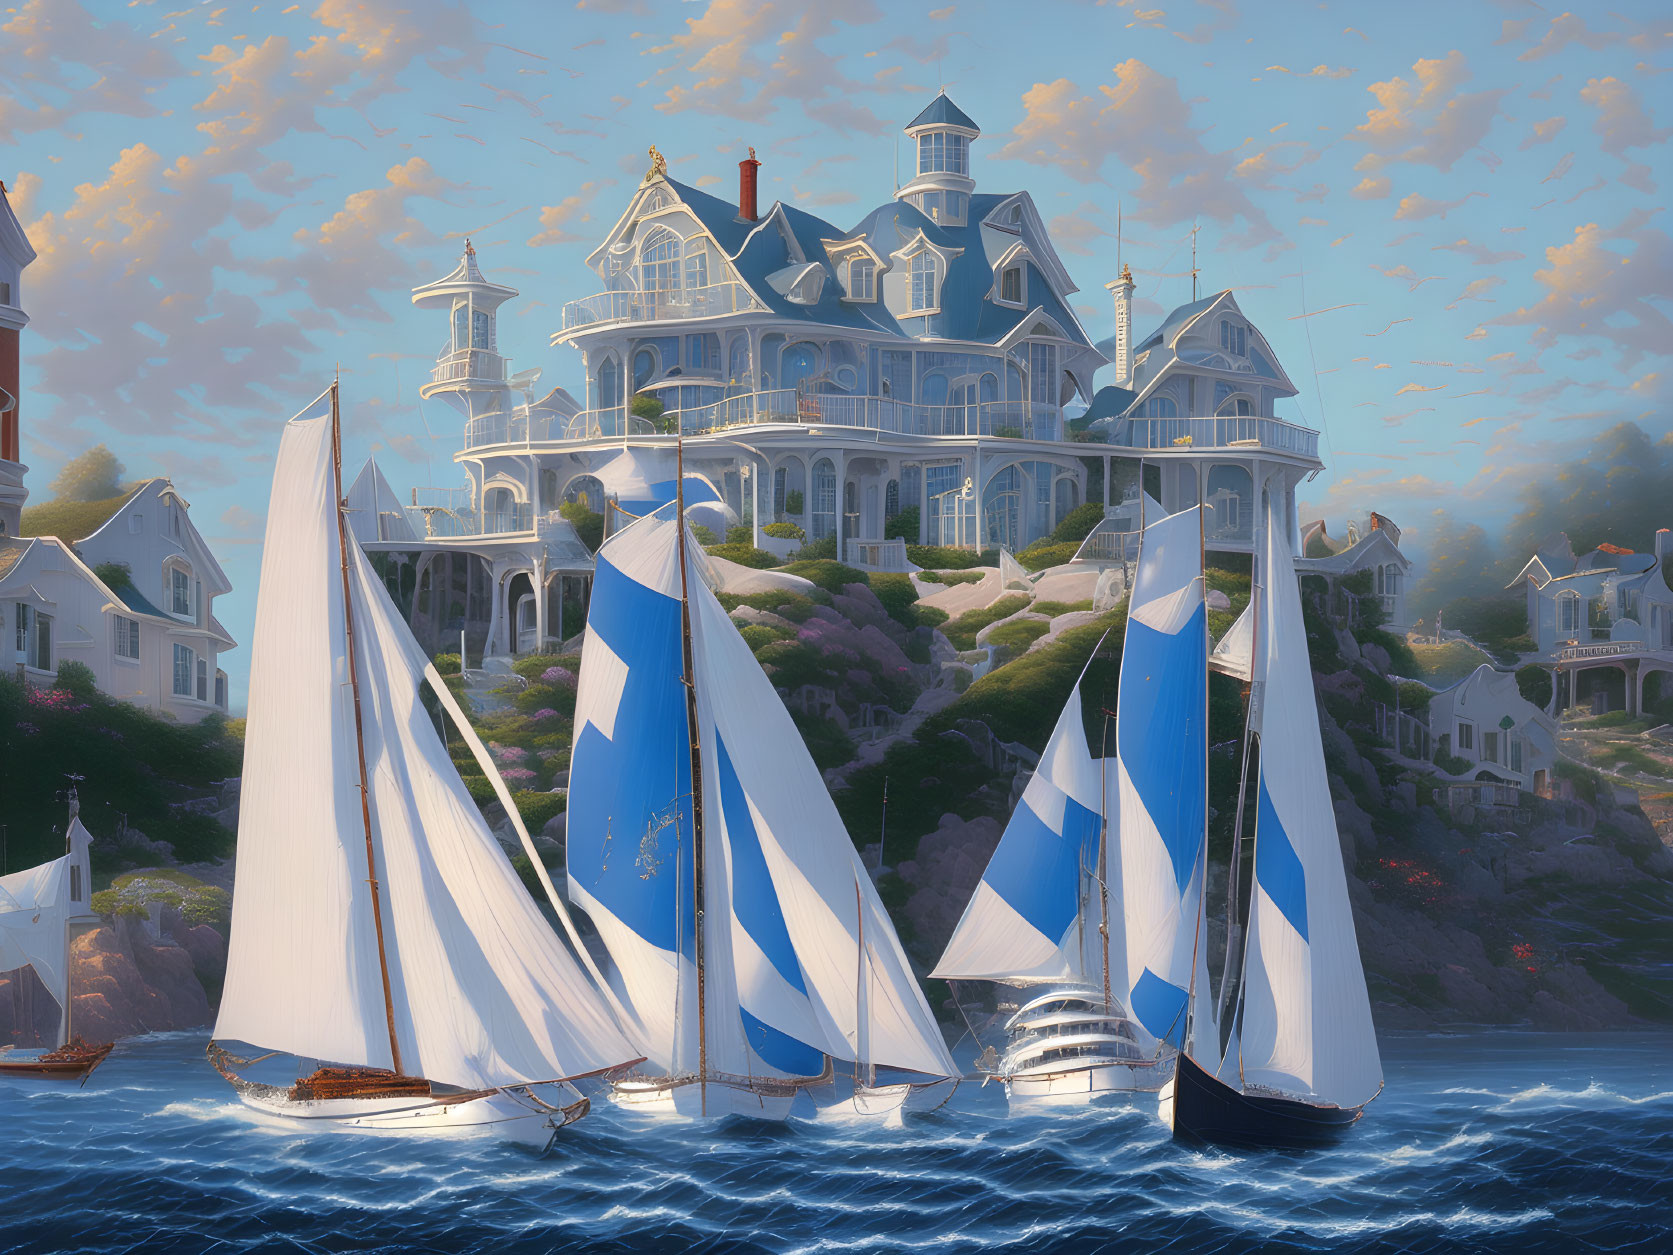 Victorian mansion by serene water with sailing boats